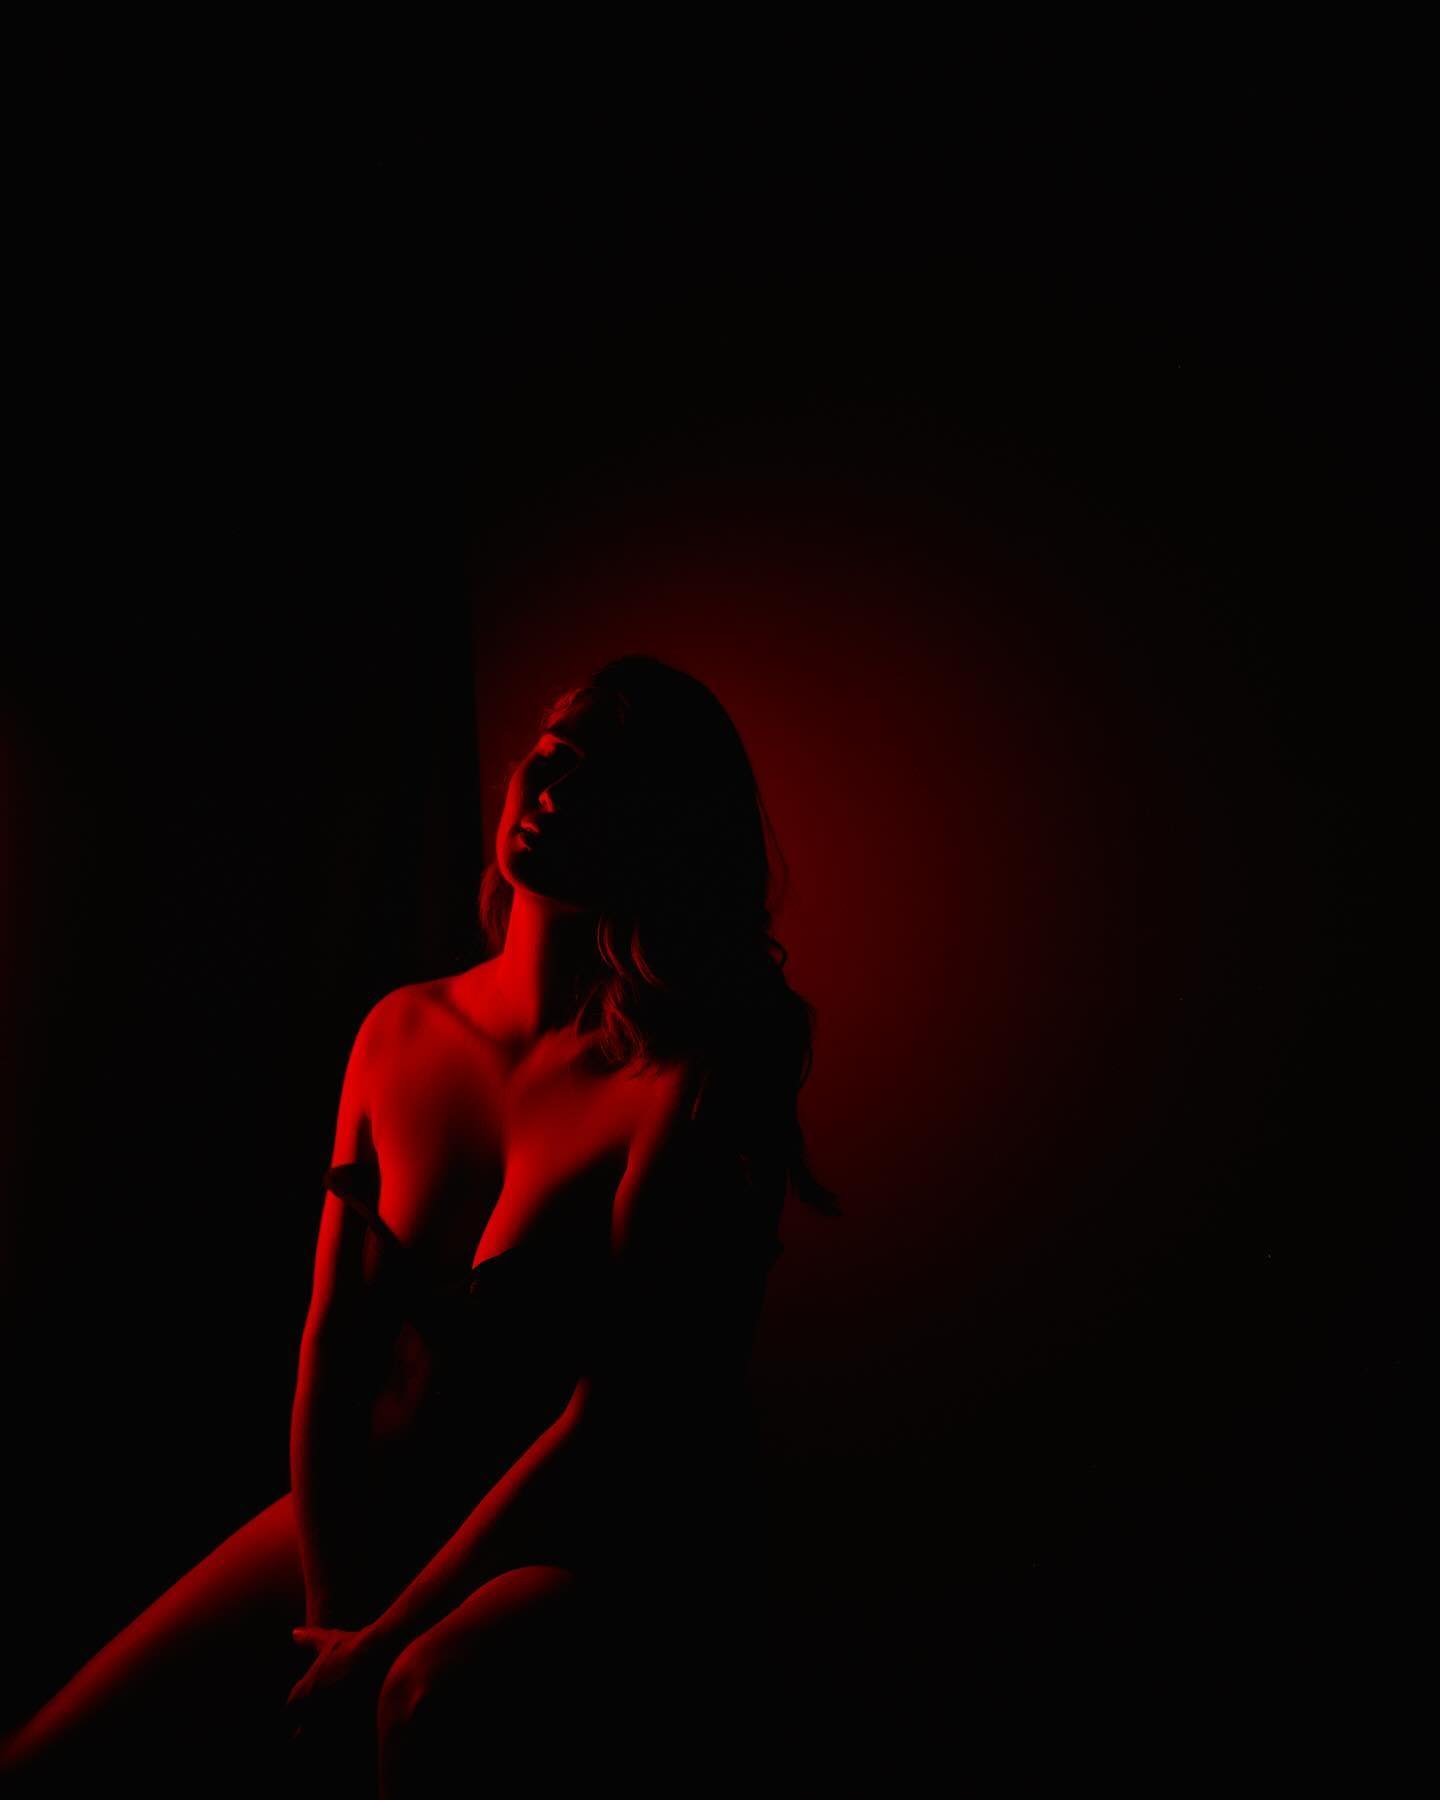 &ldquo;Had I not known all the shades and measures
of my own darkness, how else would I have restored my being to this kind of wholeness? Without my darkest sides:
 I am afraid, I am untrue. 
- Segovia Amil 

#neonvibes #redlights #kamloopsphotograph